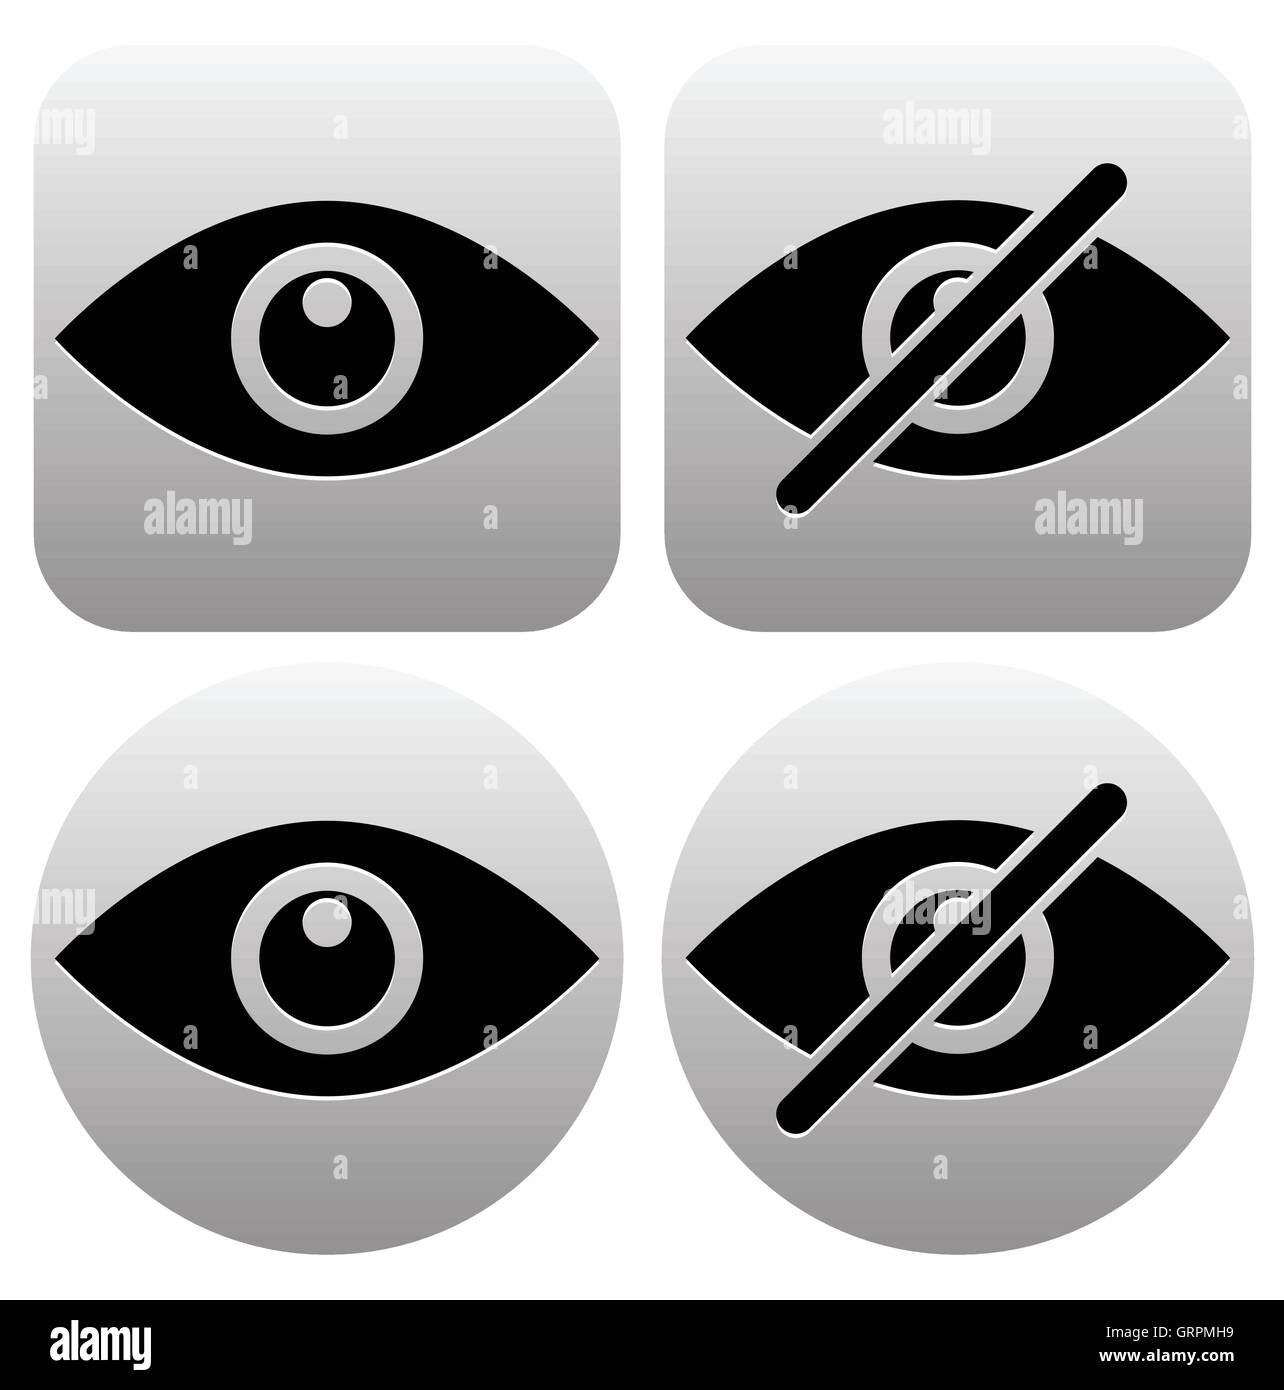 Eye symbols as show, hide, visible, invisible, public, private icons. Stock Vector